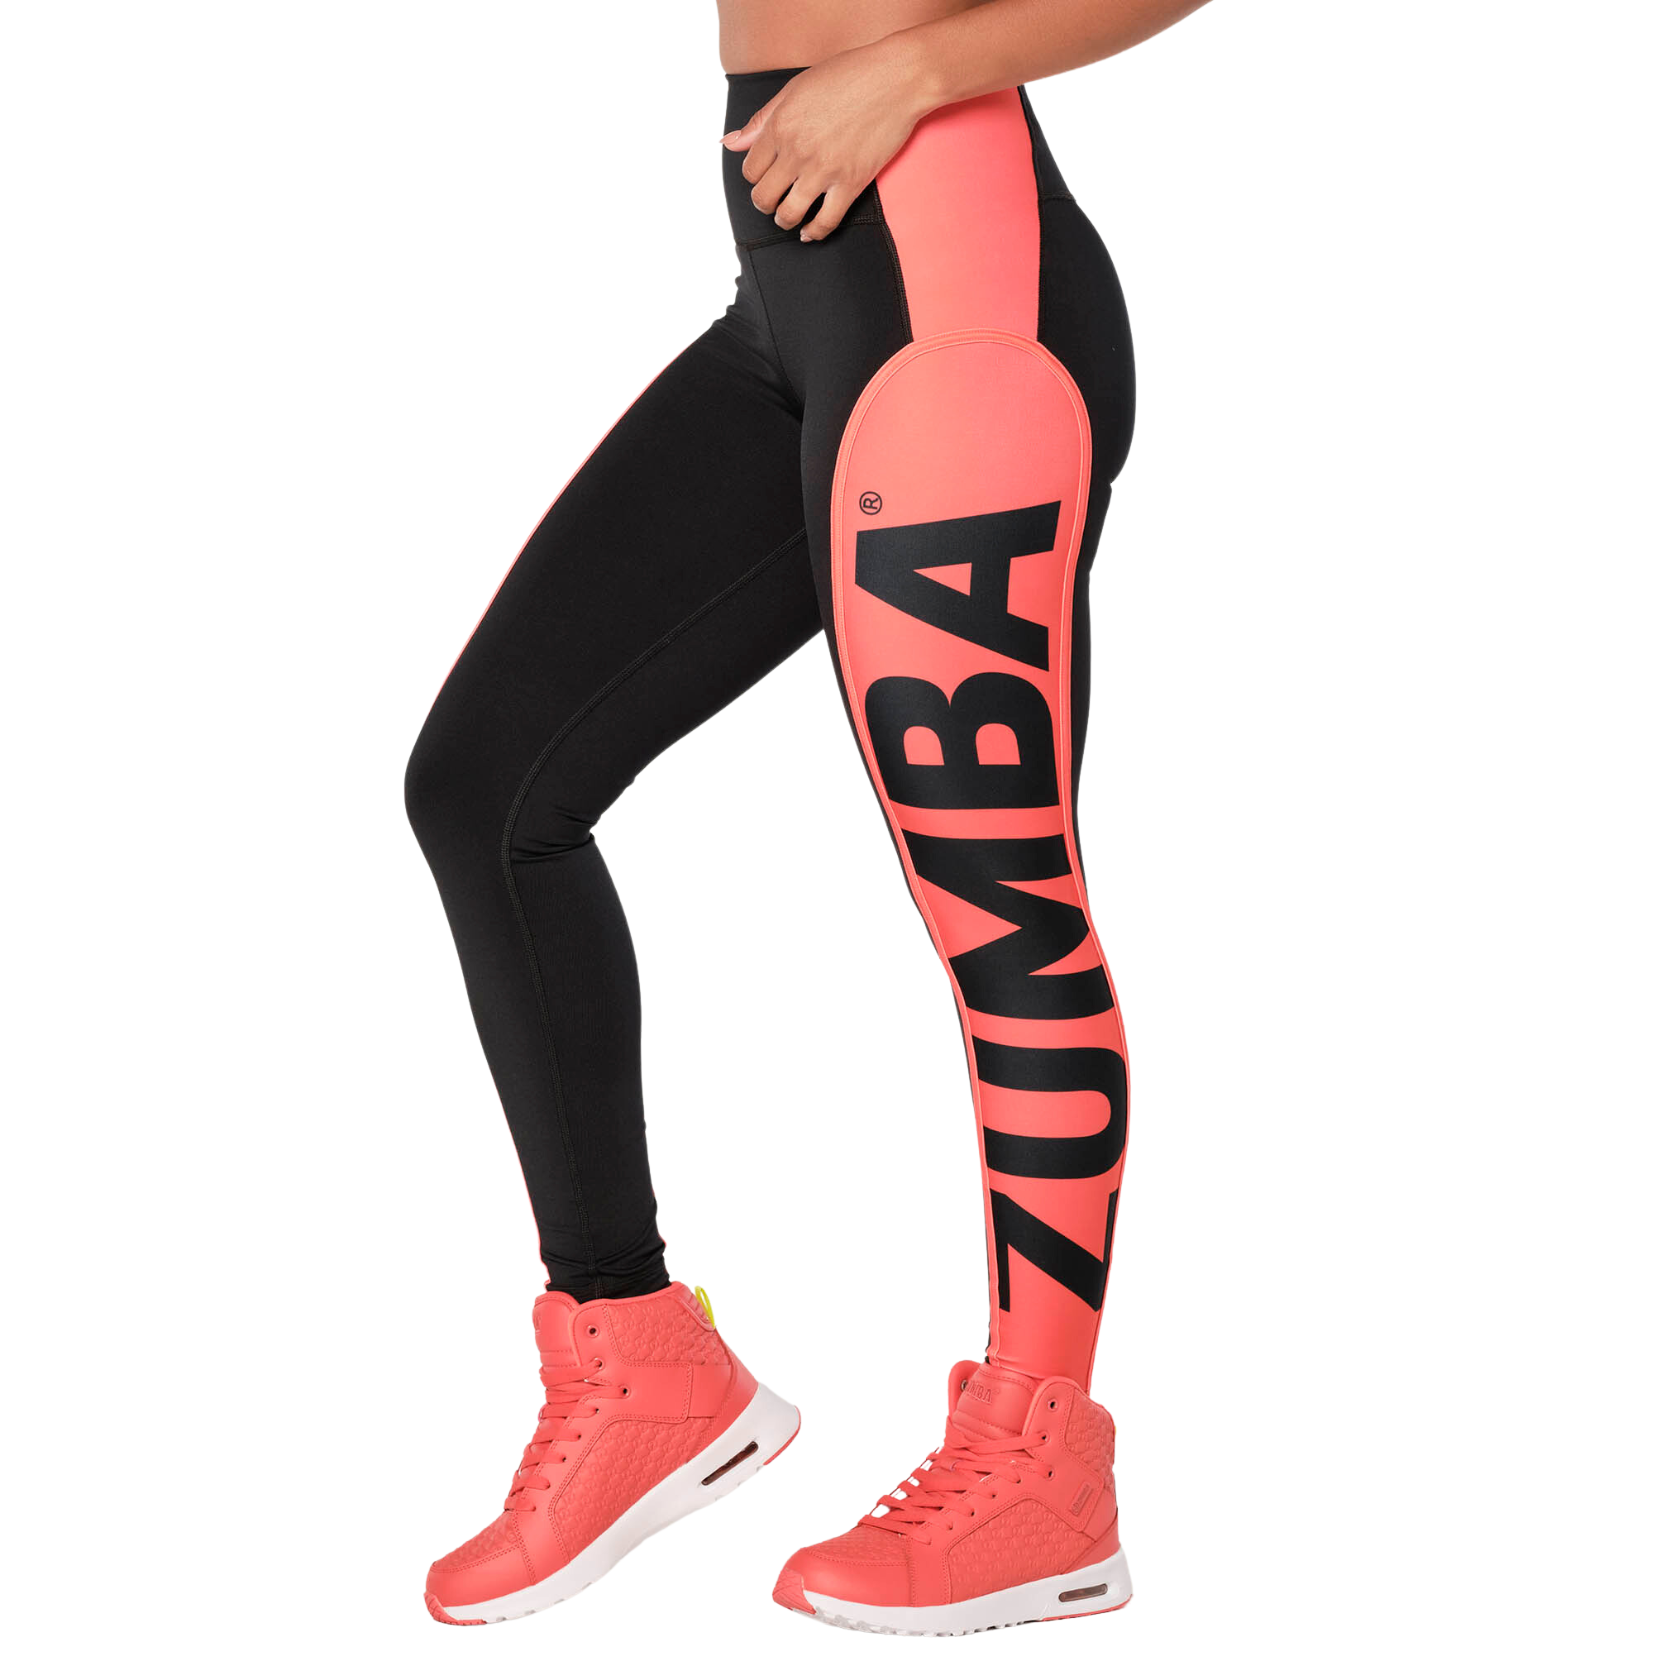 Zumba Creatives Unite High Waisted Ankle Leggings (Special Order)